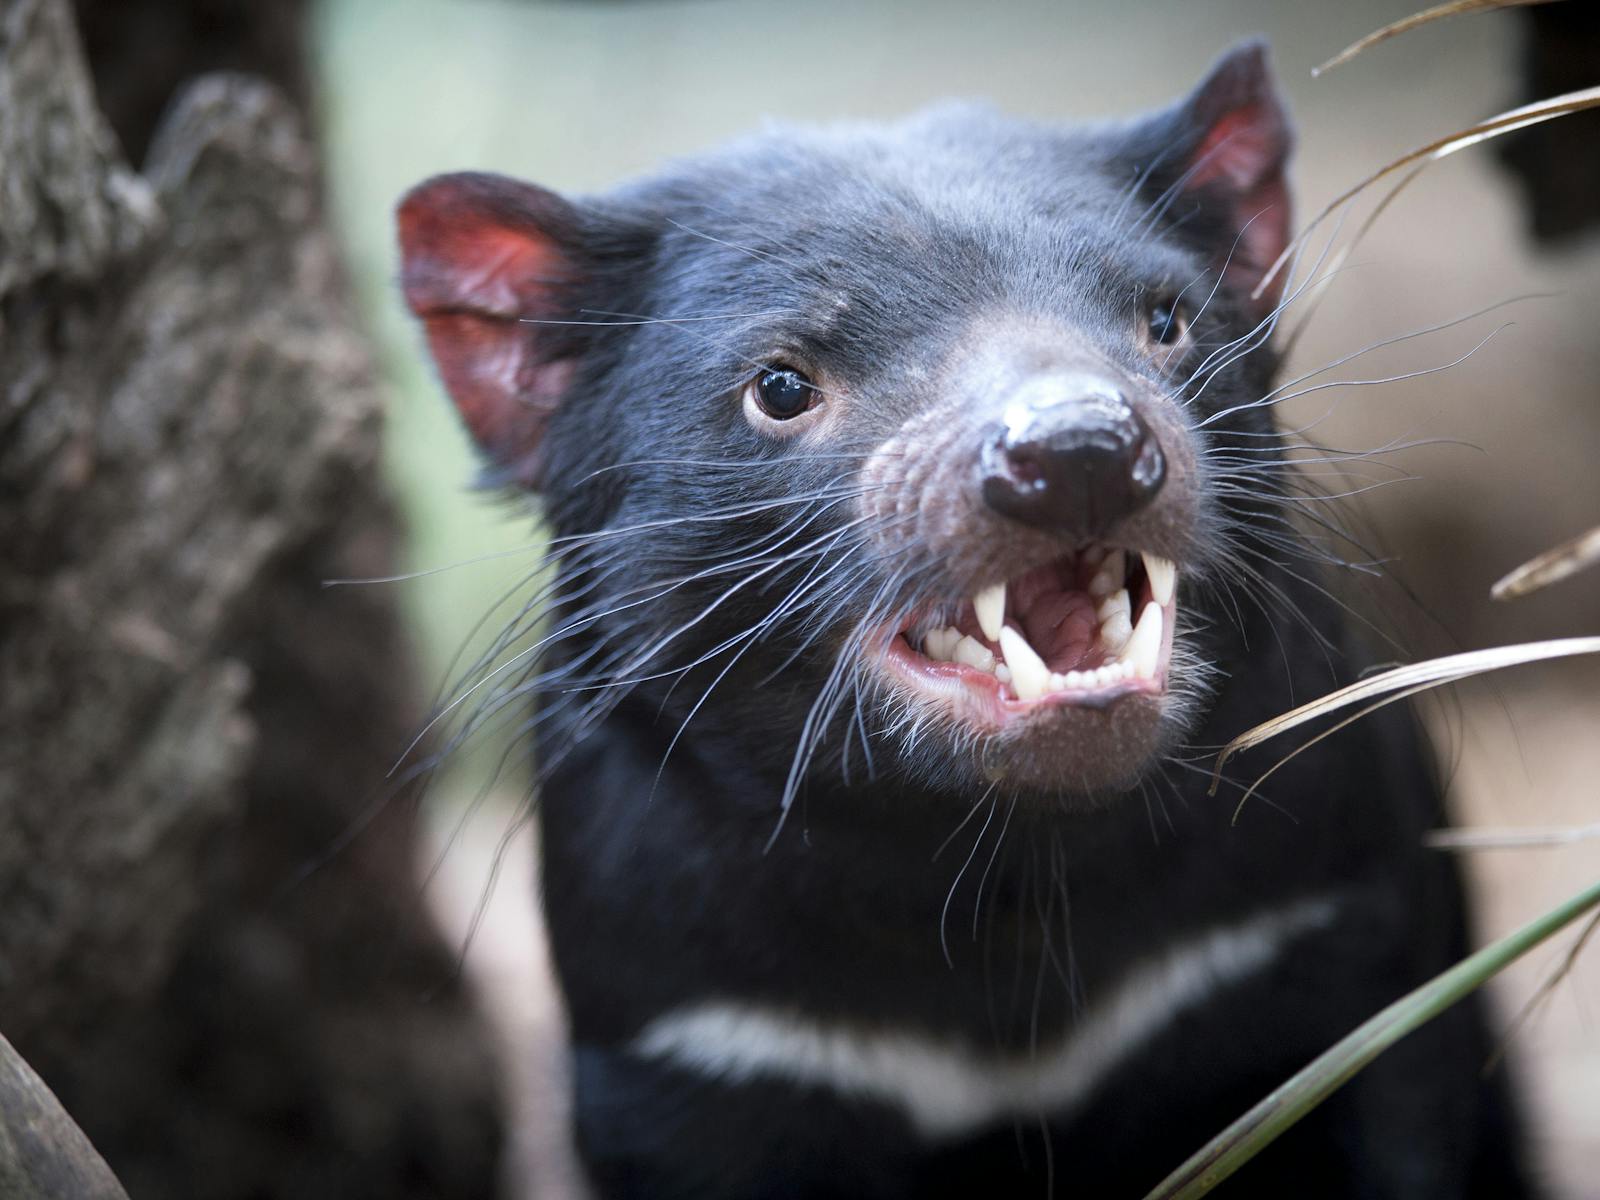 Learn about the endangered Tasmanian Devil and support the sanctuary protecting the species